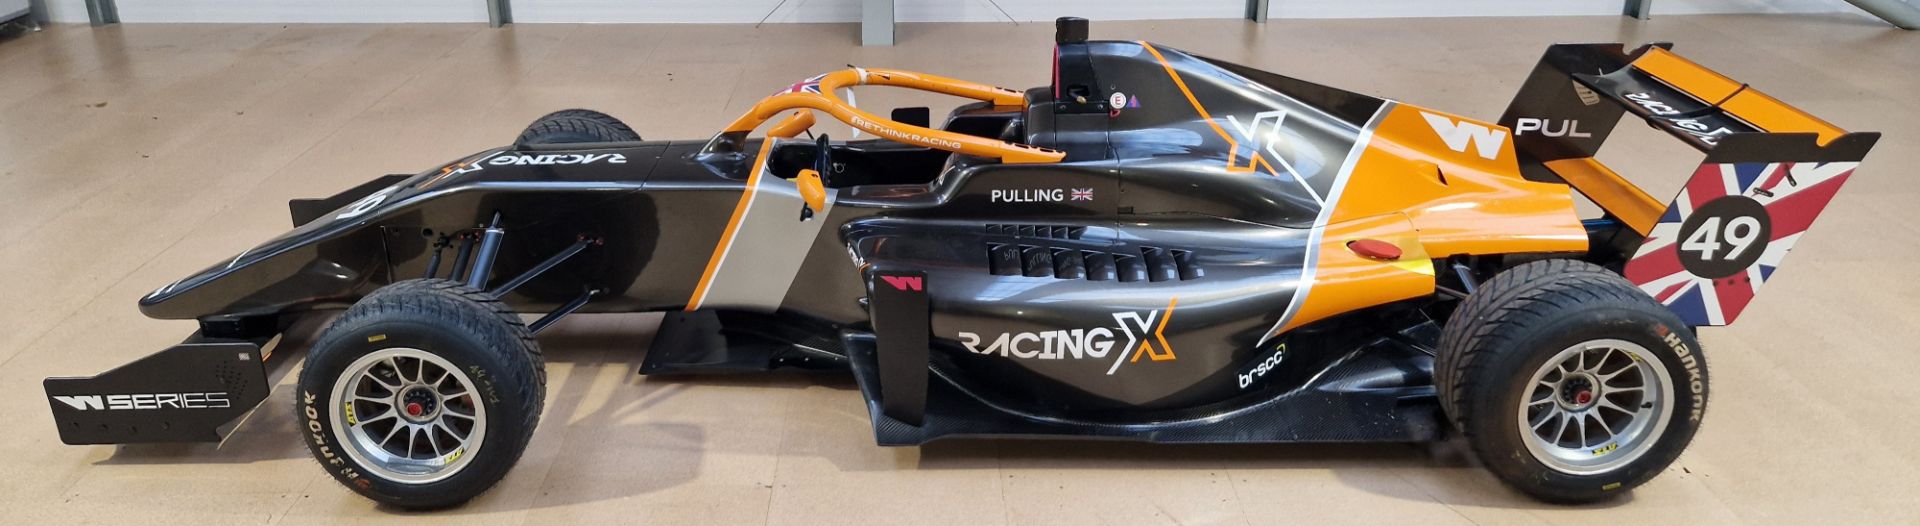 One TATUUS F3 T-318 Alfa Romeo Race Car Chassis No. 032 (2019) Finished in RACING X Livery as Driven - Image 2 of 10